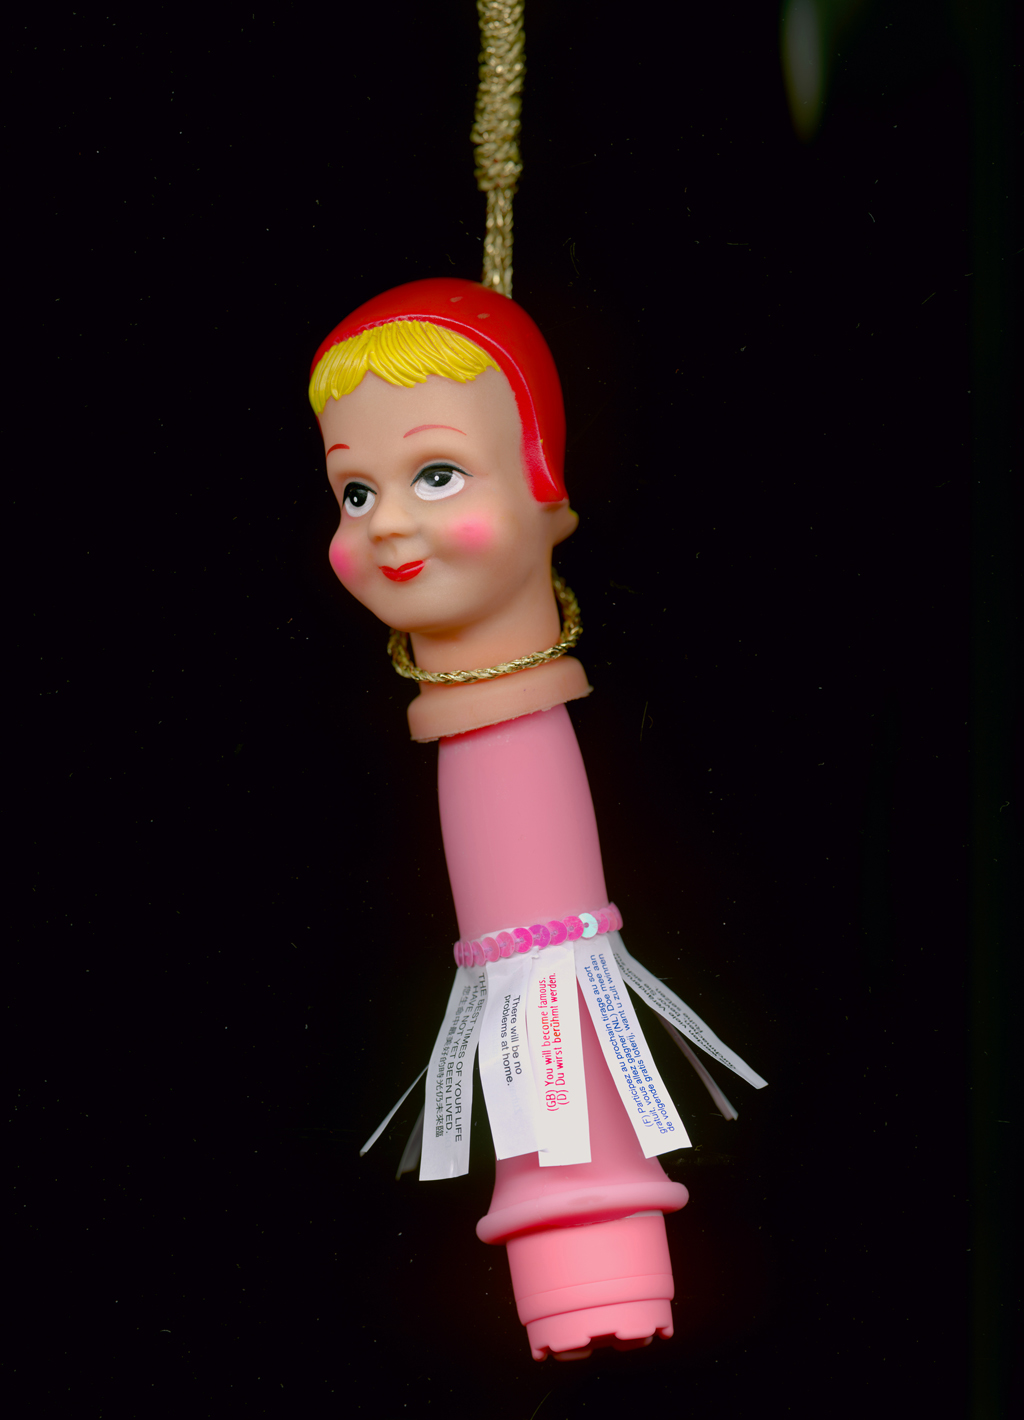 Fuckhead (from the series Worry Dolls), archival ink on photo rag, 60 x 44cm, 2010